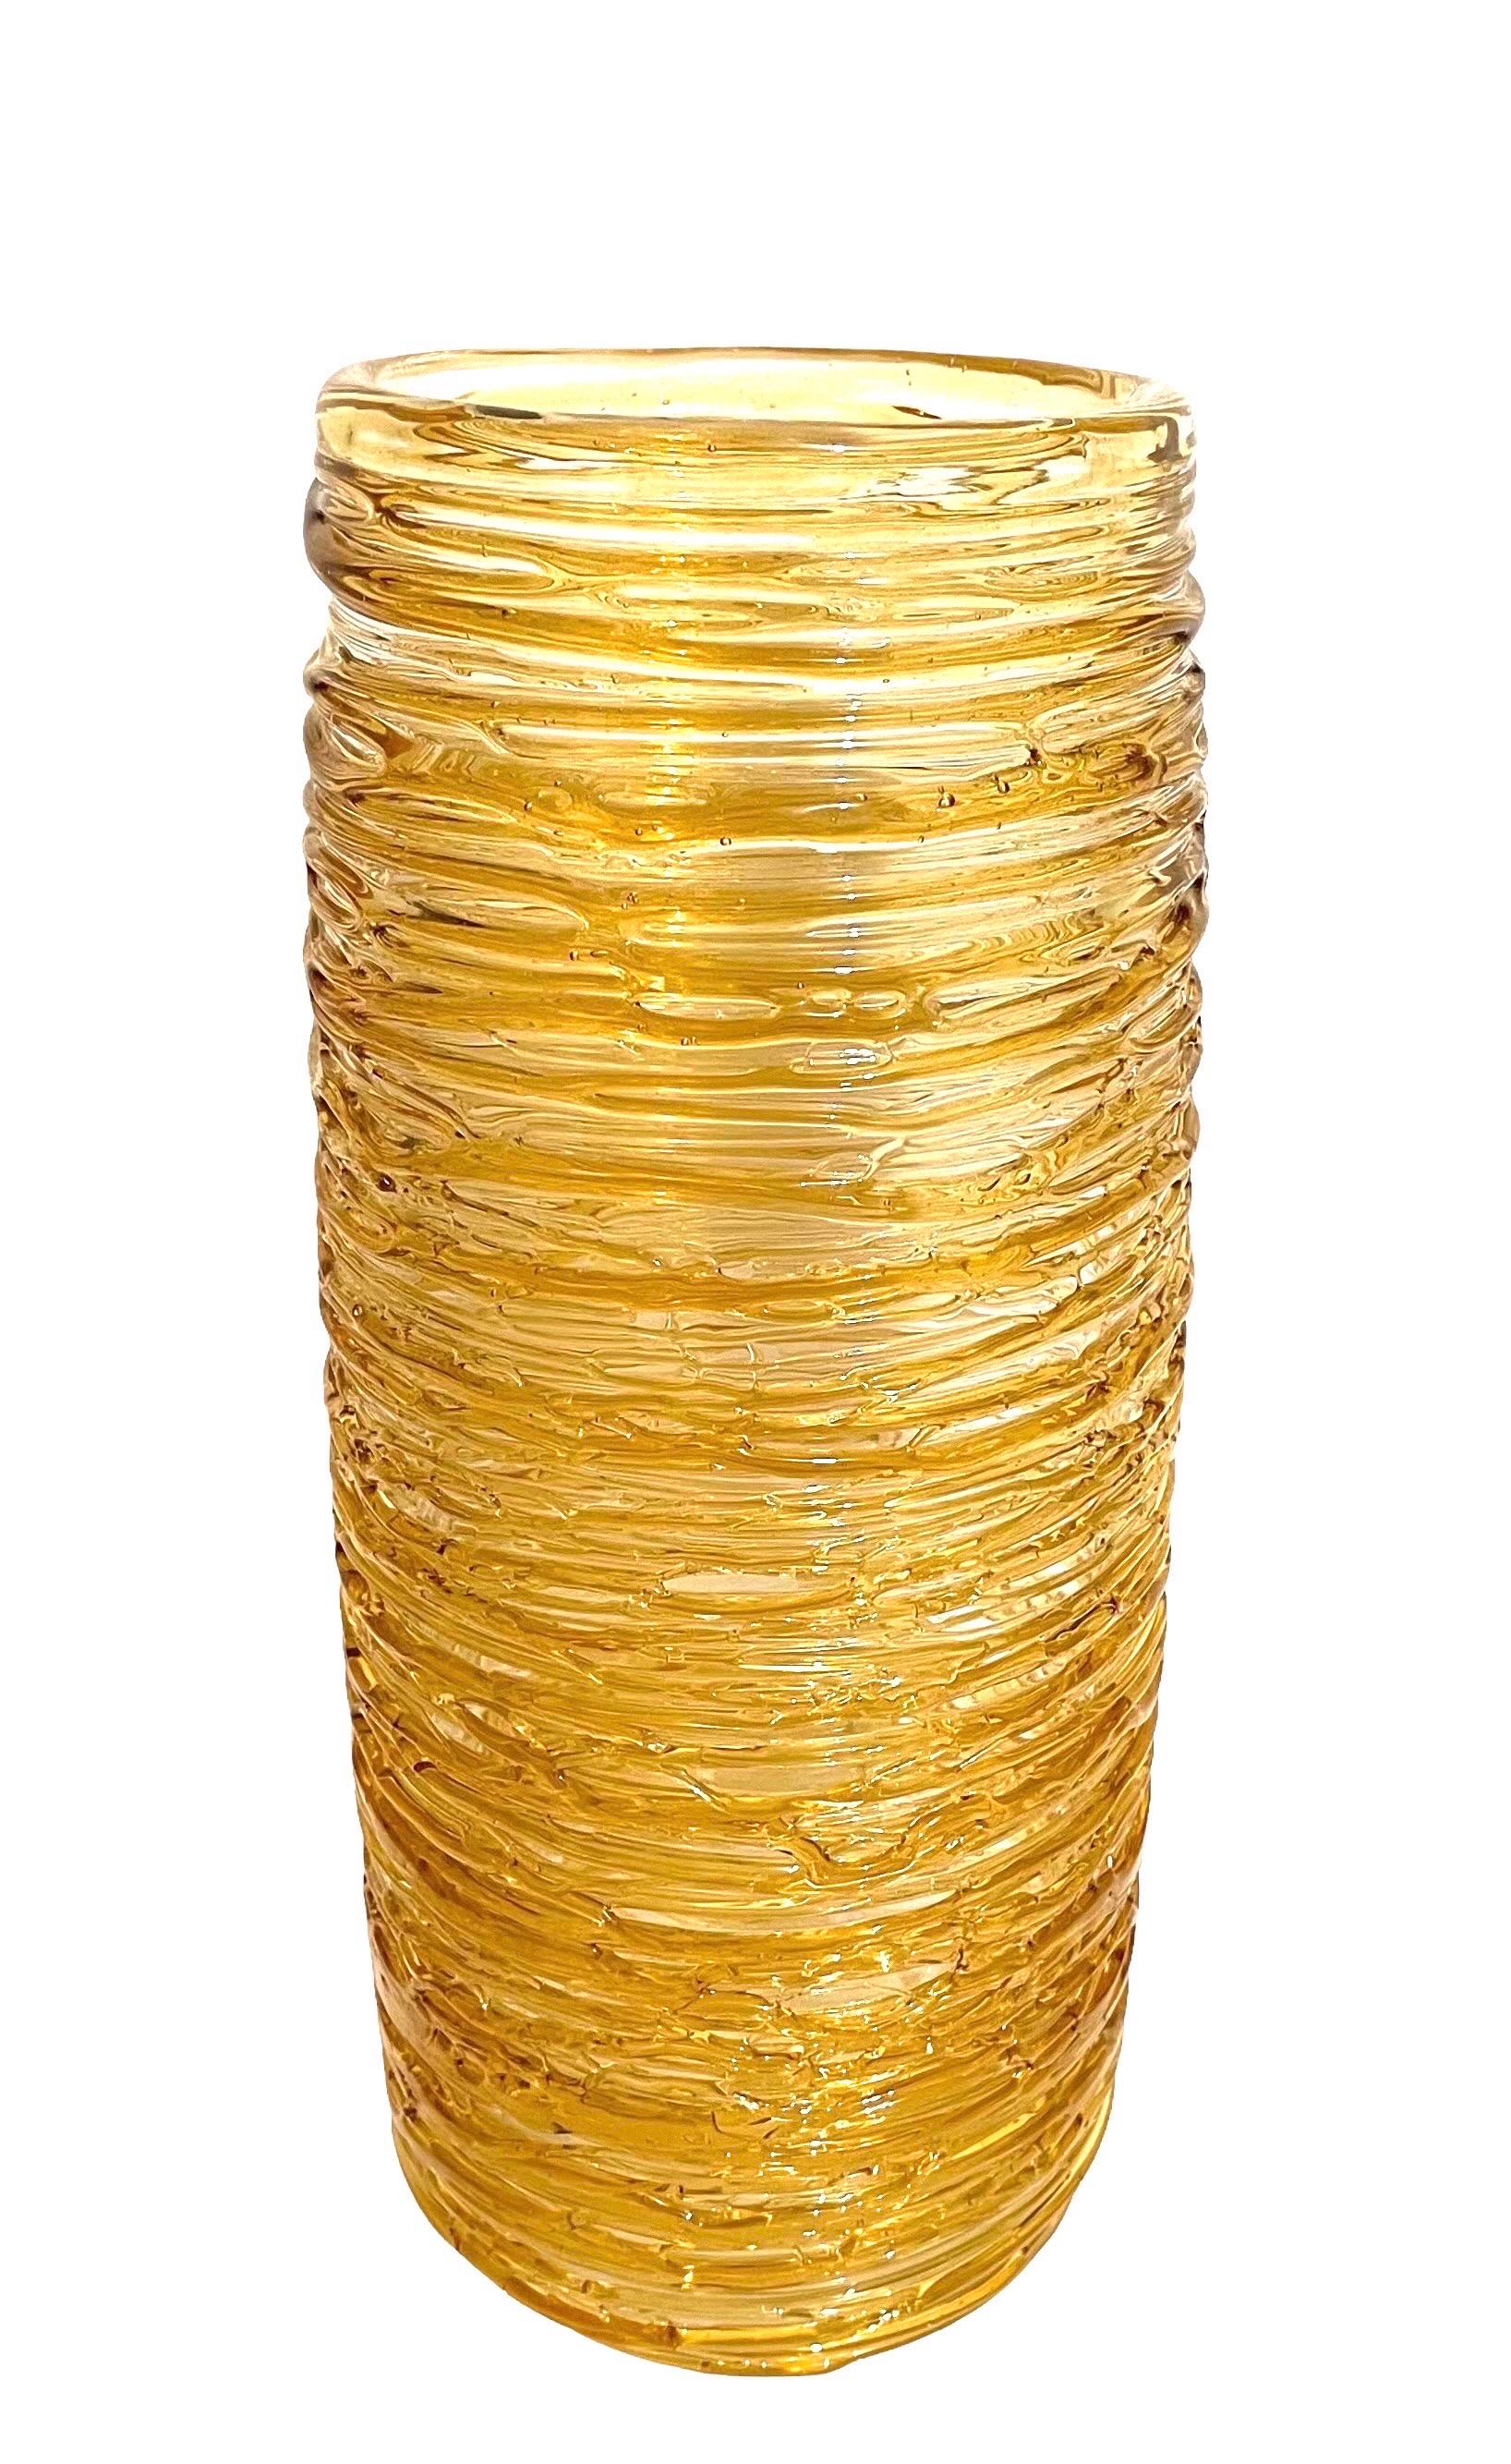 

Dimensions: 12.5 X 5.25 X 5.25 in
The organic shaped vase showcases an applied light gold colored threaded design enveloping the clear body, around. Hand signed Constantini S. It came from an important estate in the Palm Beach area.
Made in